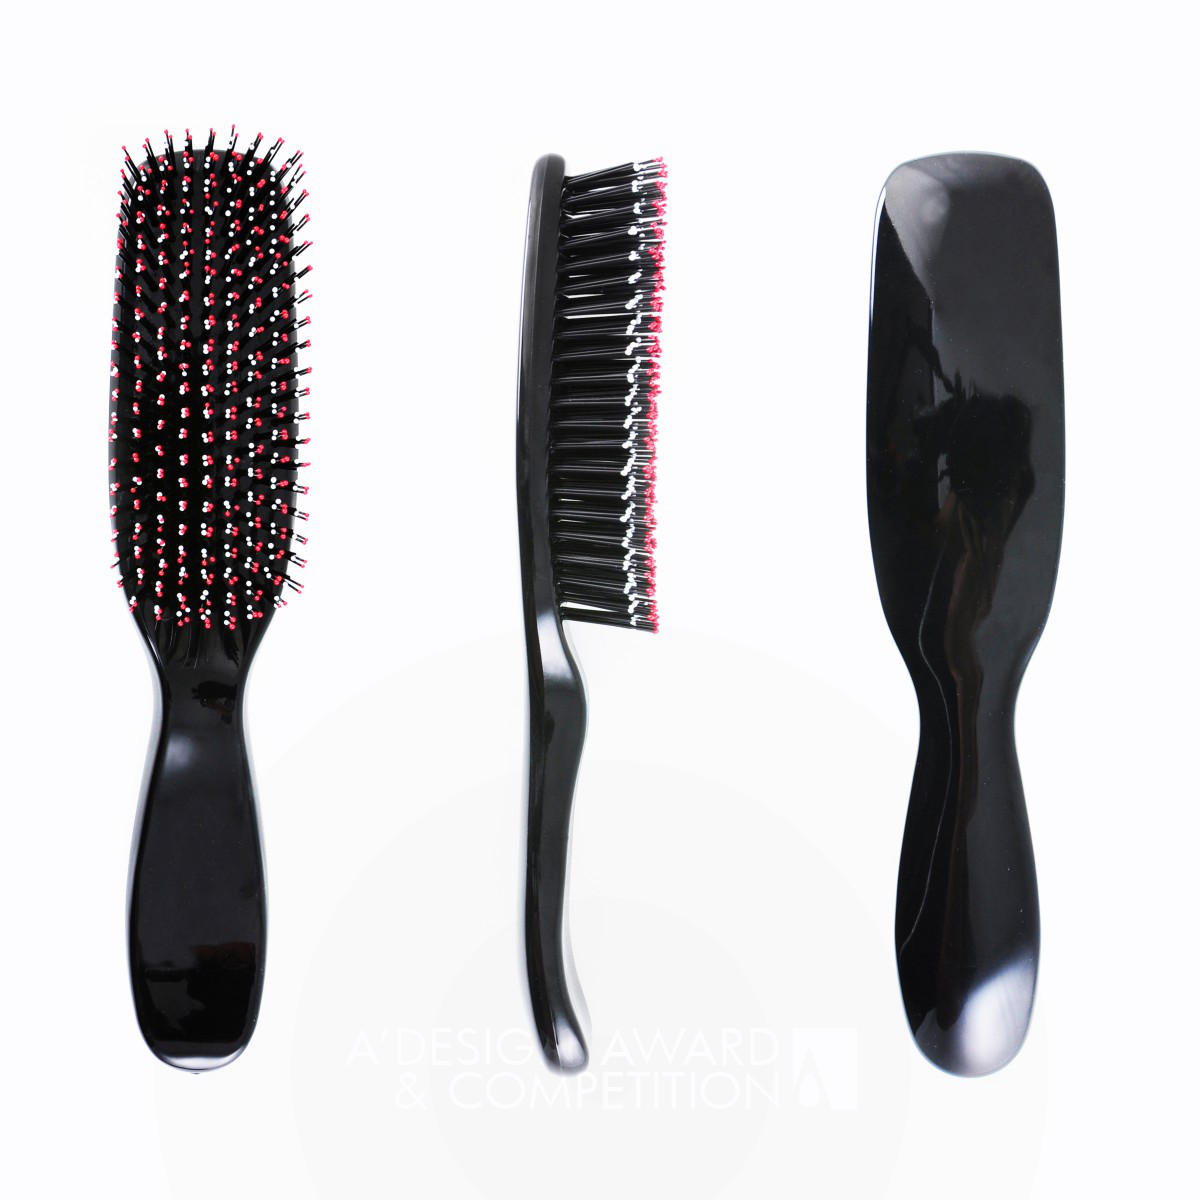 Tender Care Brush Massaging and Stying Hairbrush by Dennis Fang